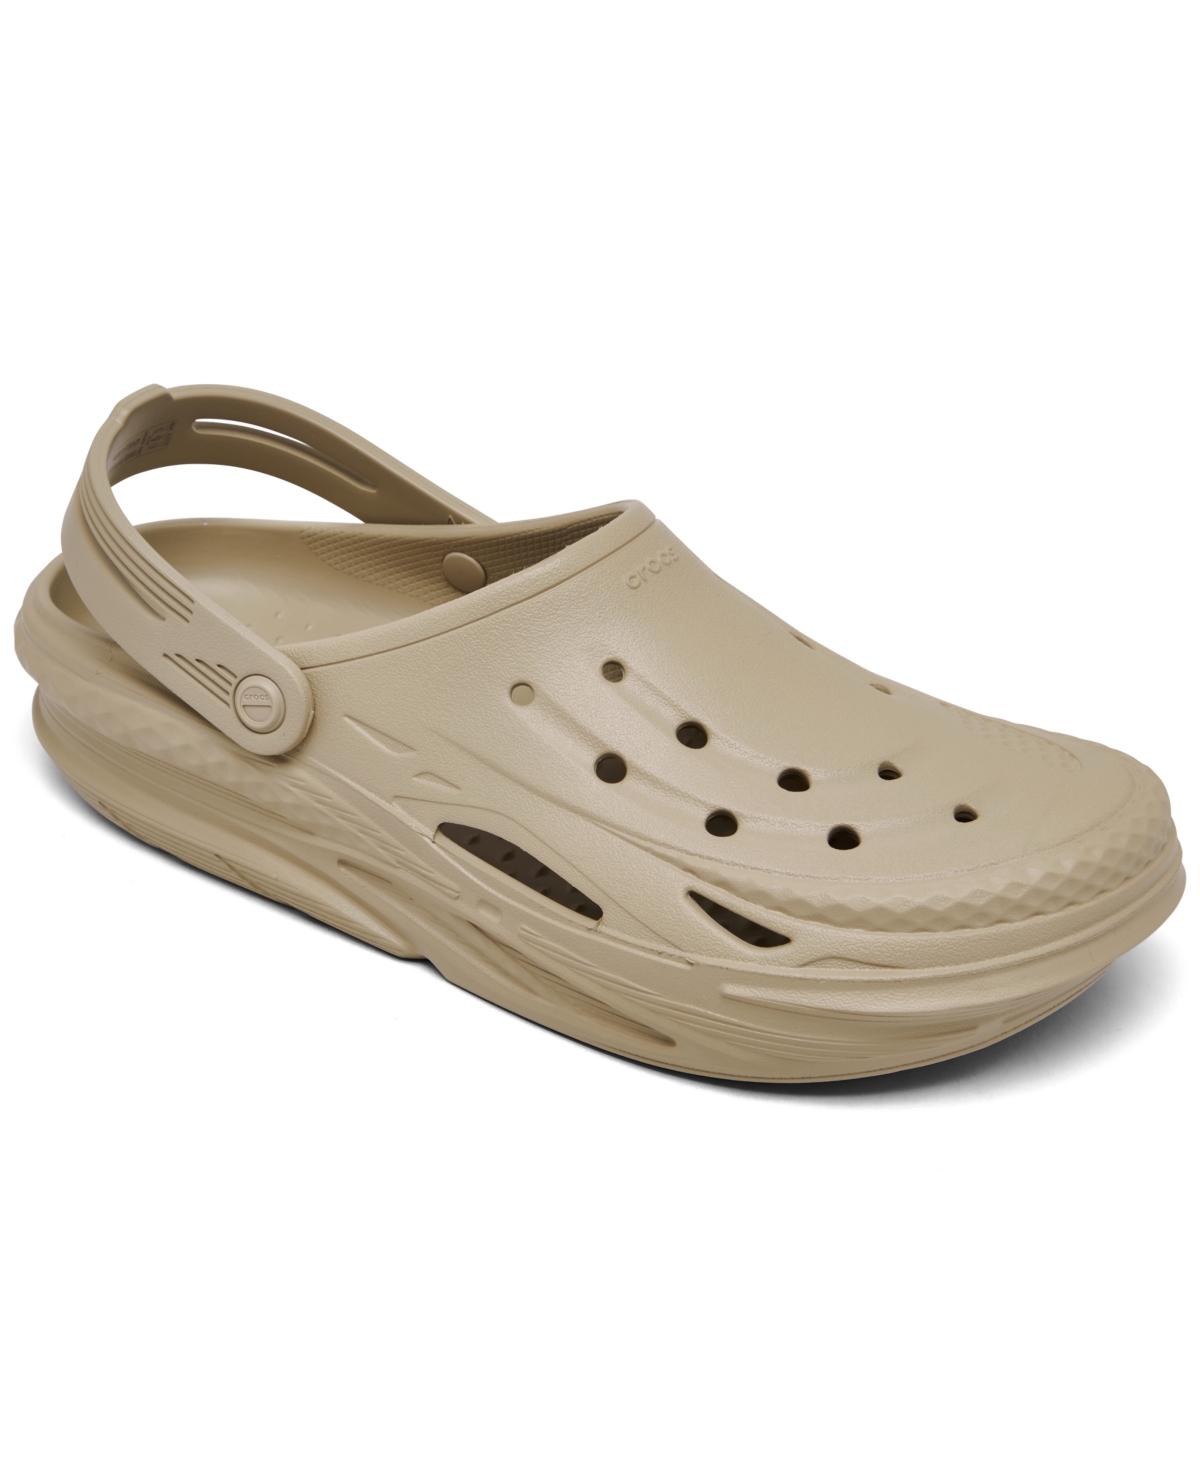 Men's Off Grid Comfort Casual Clogs from Finish Line - Cobblestone